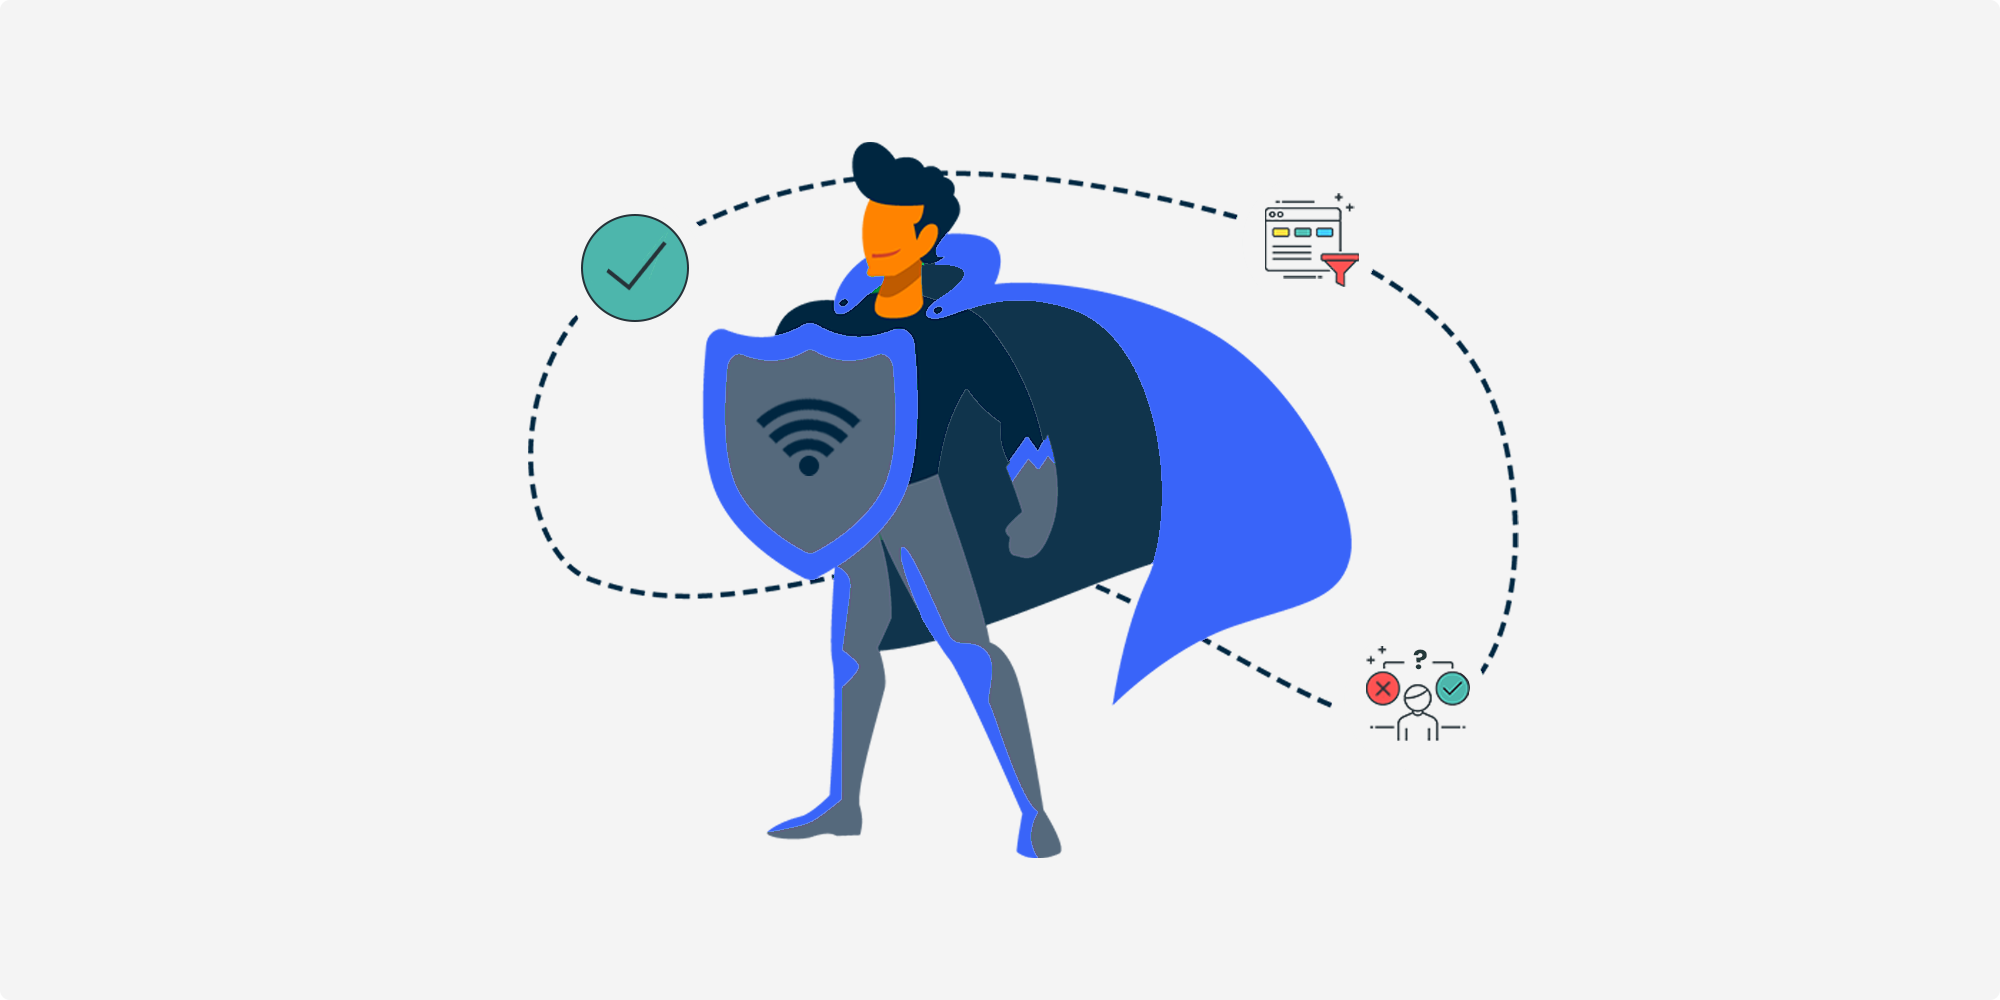 network access control super hero controlling access to business wifi networks